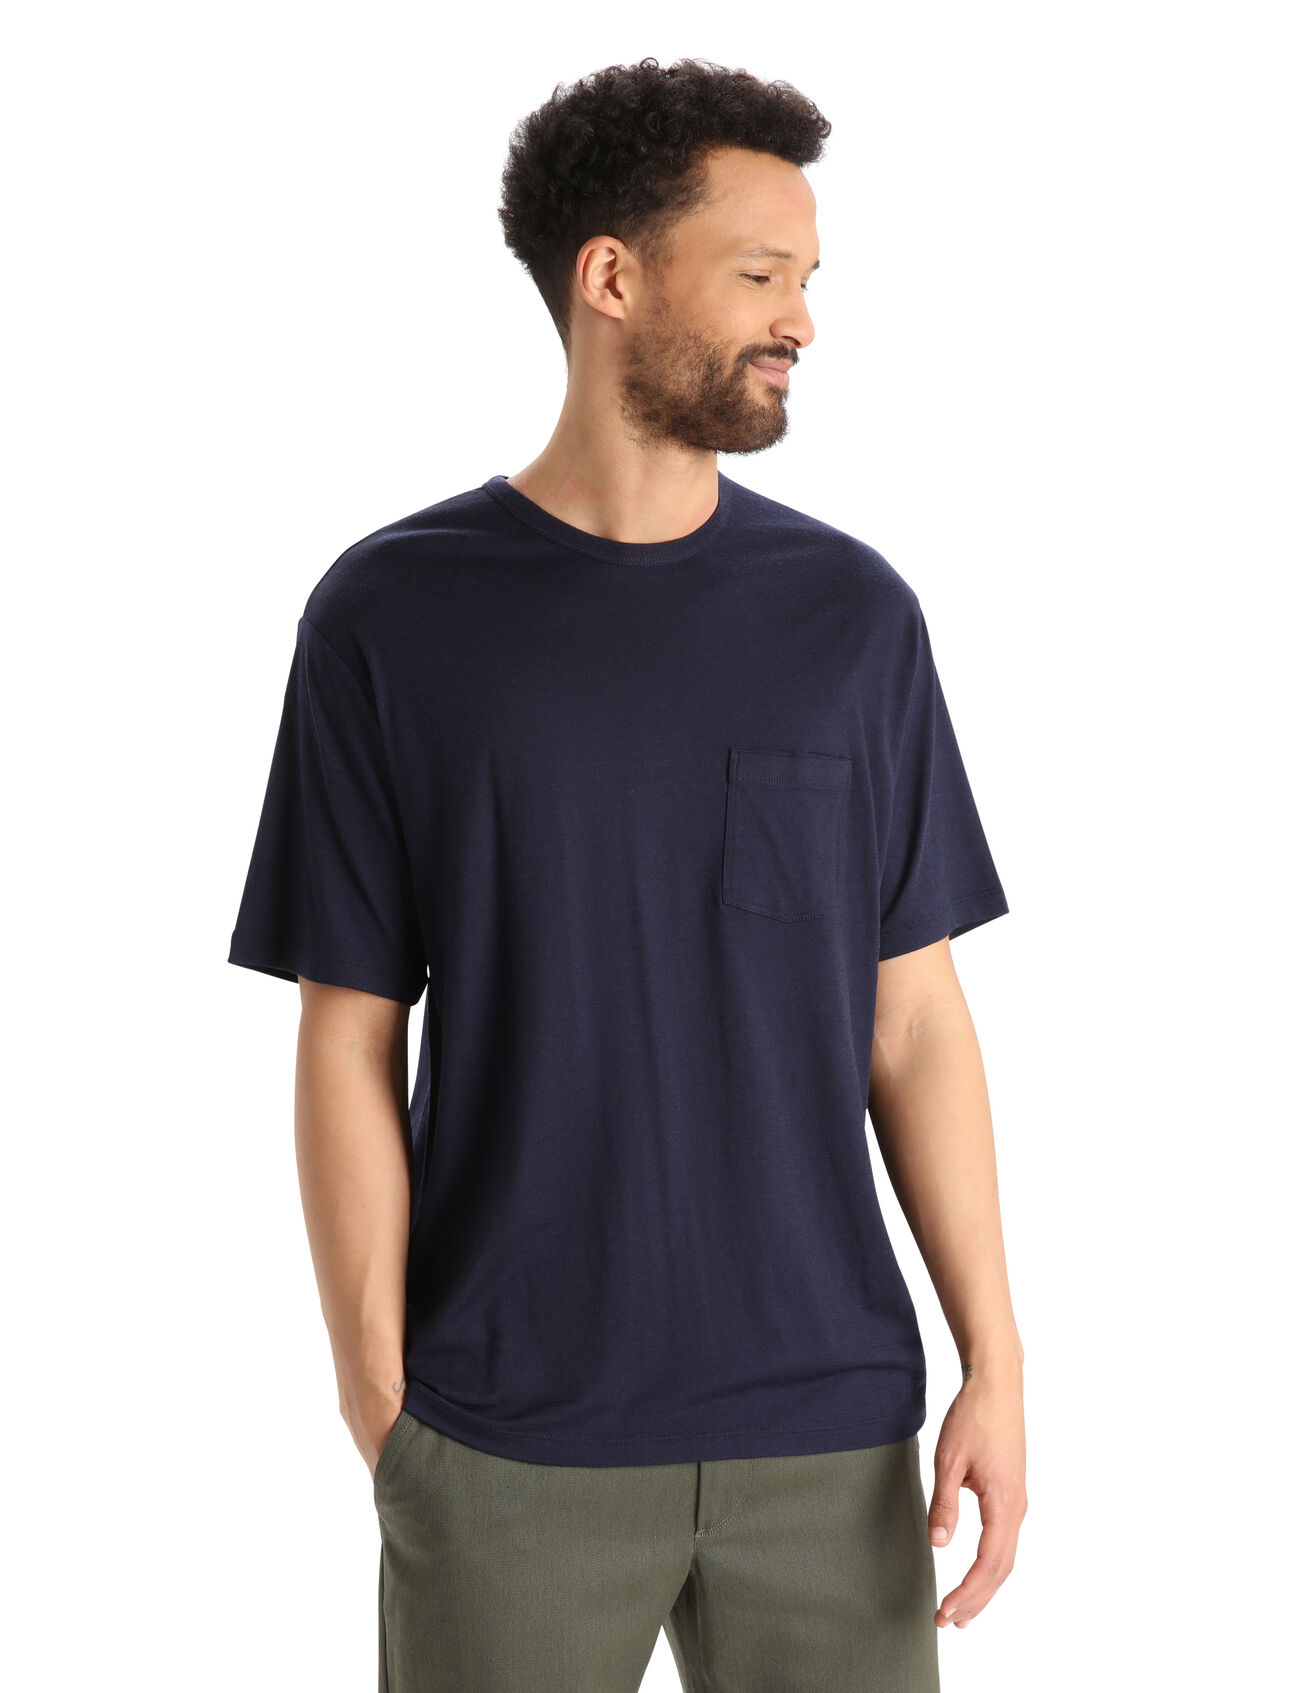 Mens Merino Granary Short Sleeve Pocket T-Shirt A classic pocket tee with a relaxed fit and soft, breathable, 100% merino wool fabric, the Granary Short Sleeve Pocket Tee is all about everyday comfort and style.